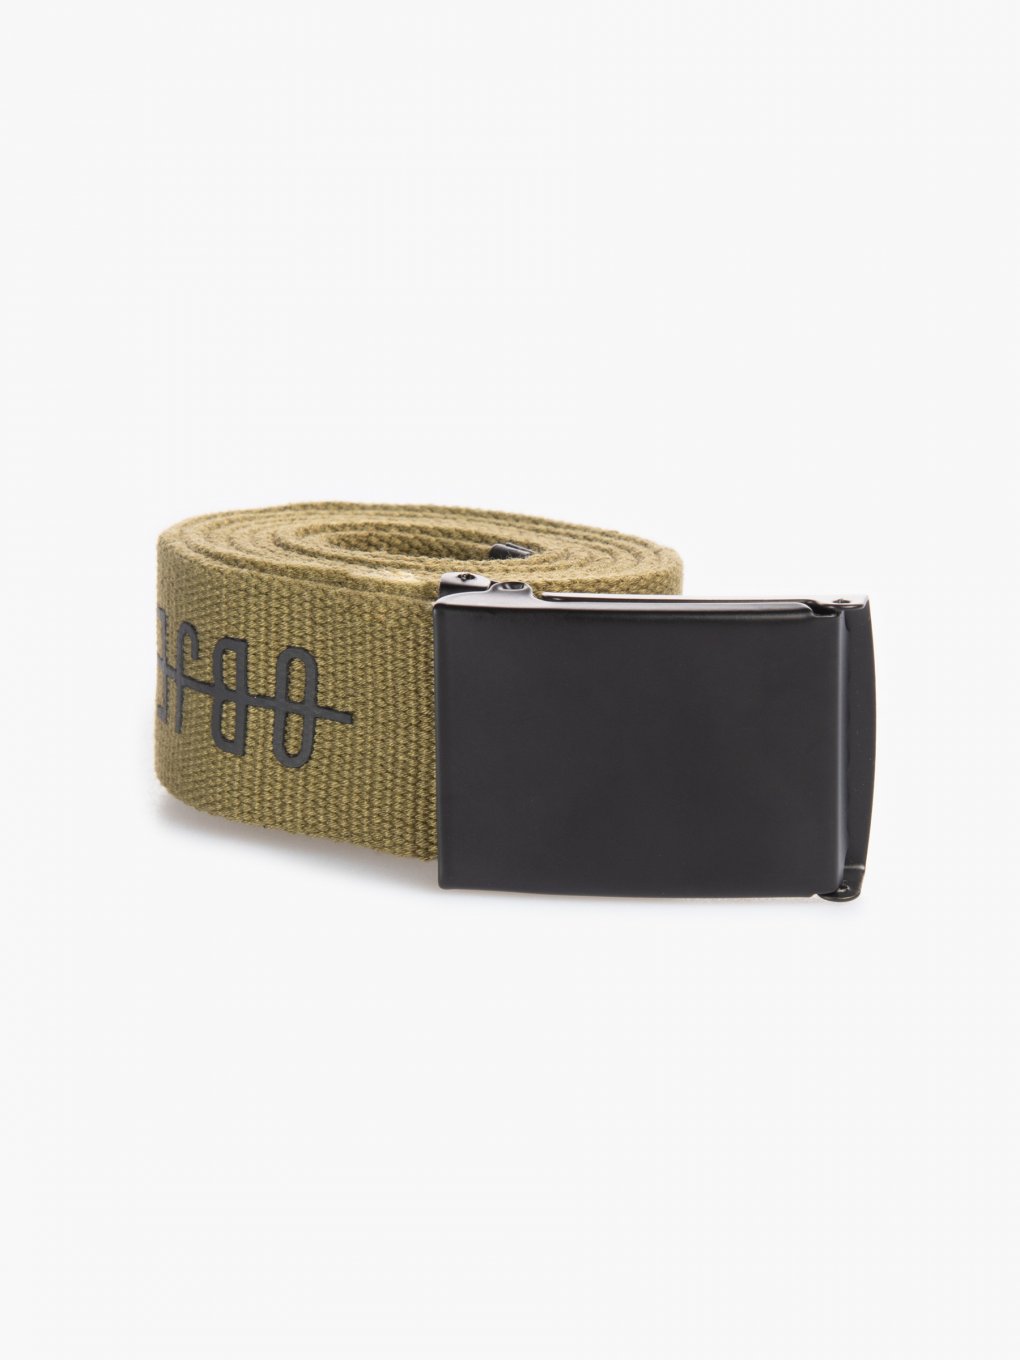 Canvas belt with metal buckle